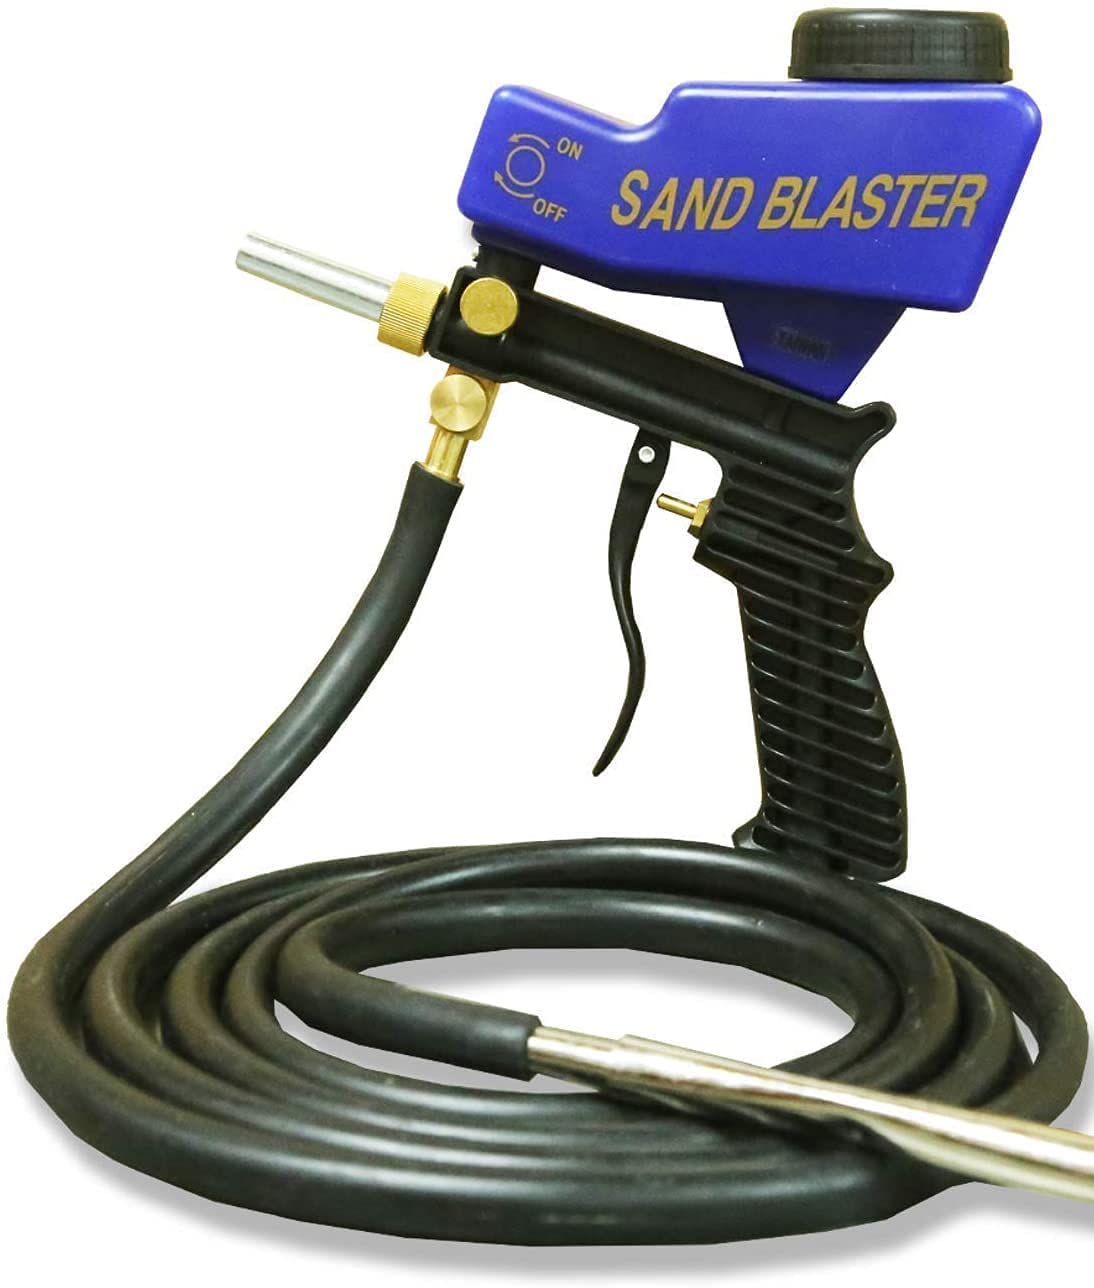 Featured image for “Sandblaster – 25 LB”